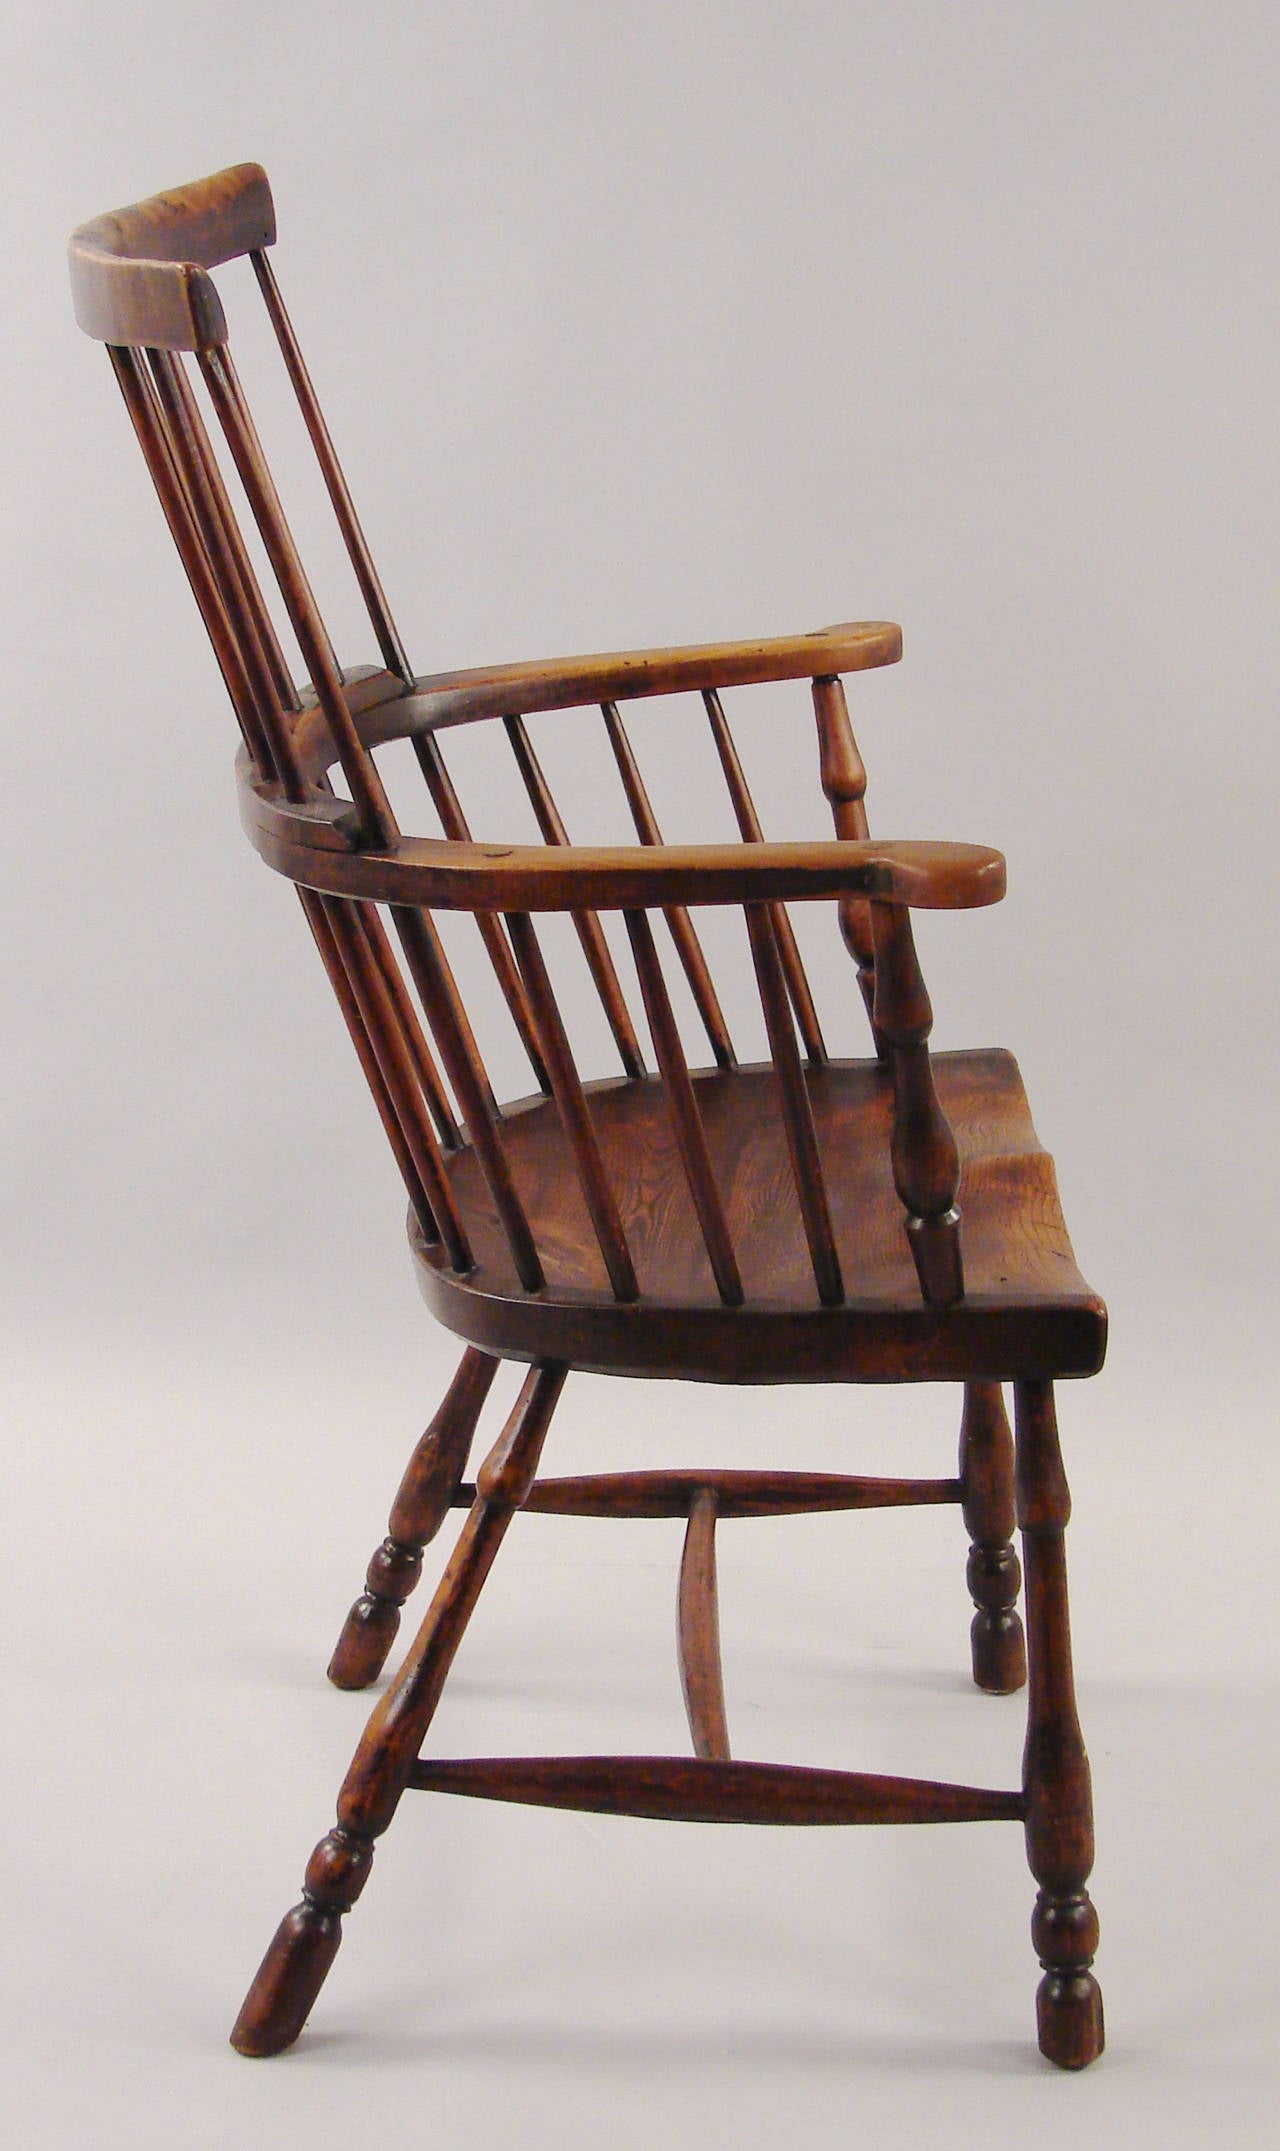 An English elm and hickory comb back windsor armchair, the spindle back meeting a well-shaped saddle seat supported on turned legs joined by a simple stretcher, circa 1820-1850. Lovely old color.